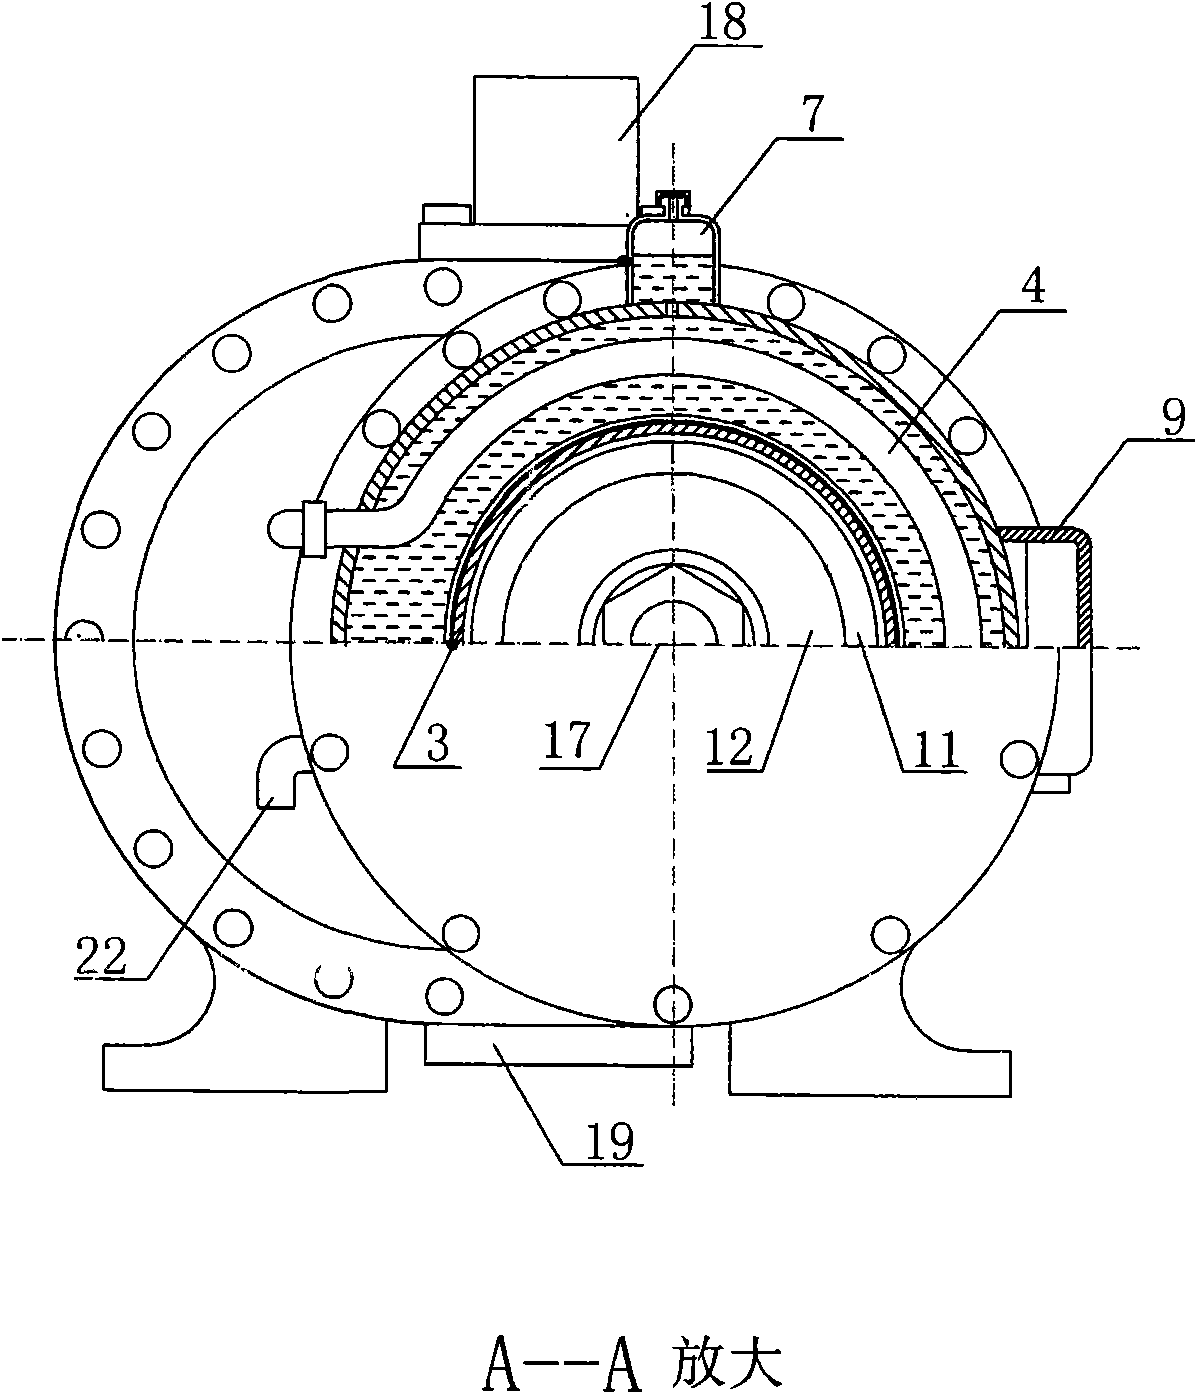 Internal cooling motor system body with pressure resistance cover body